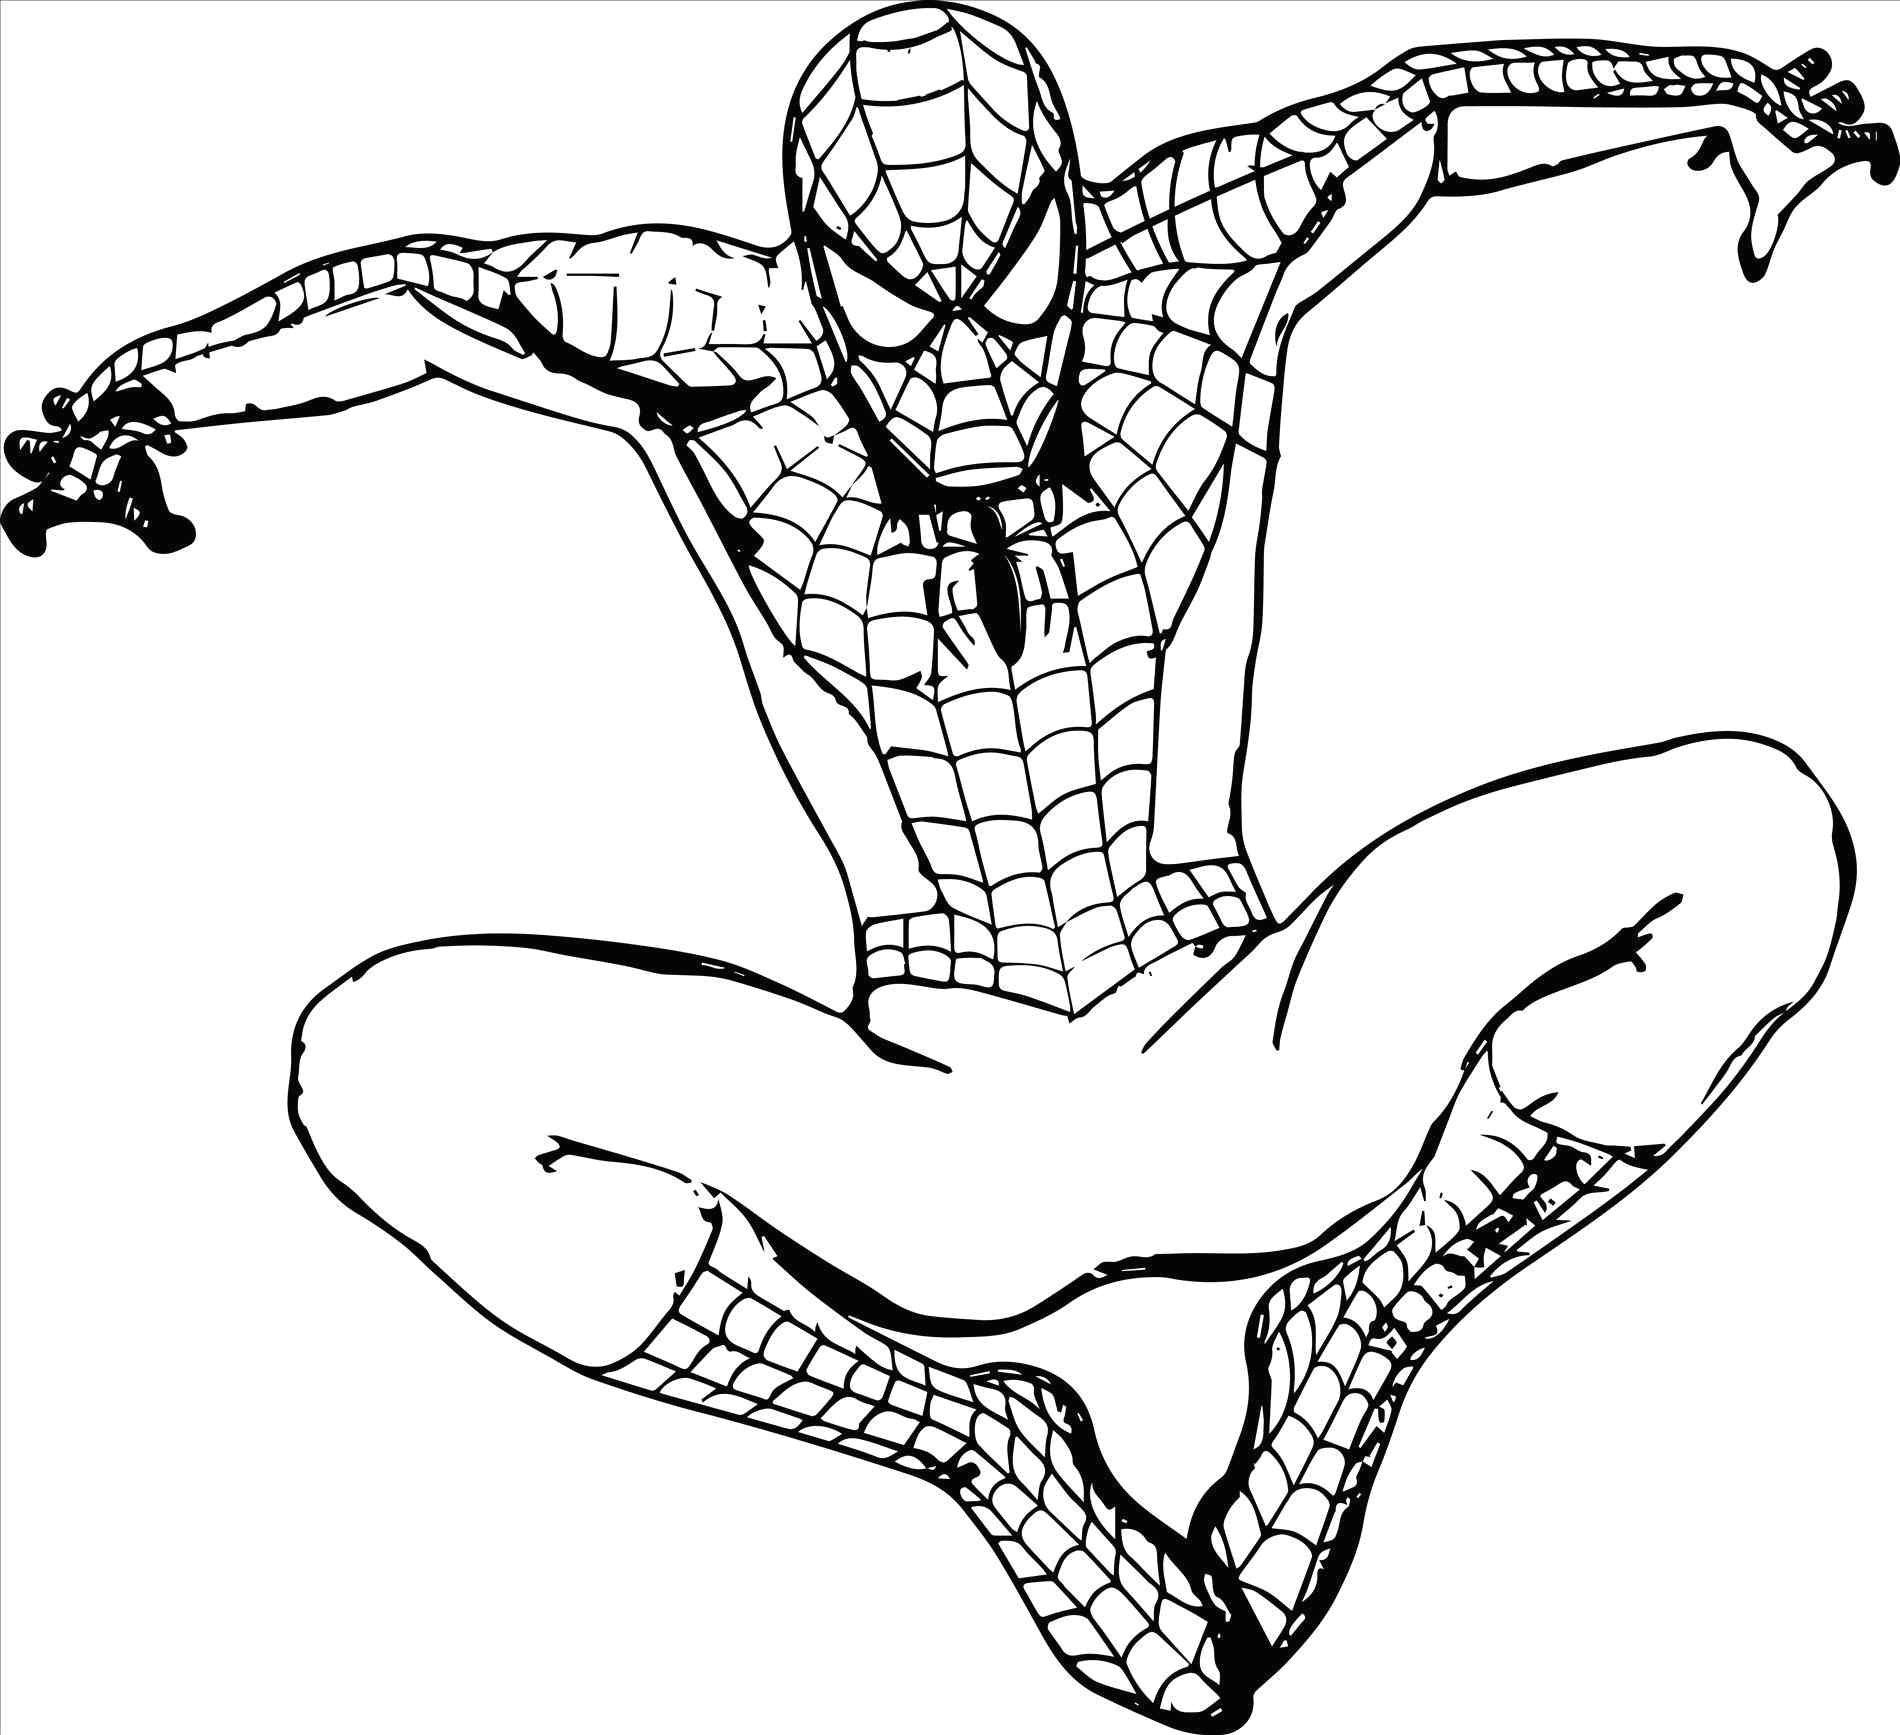 X-men Drawing Easy Spiderman Coloring Pages to Print Luxury Superheroes Easy to Draw